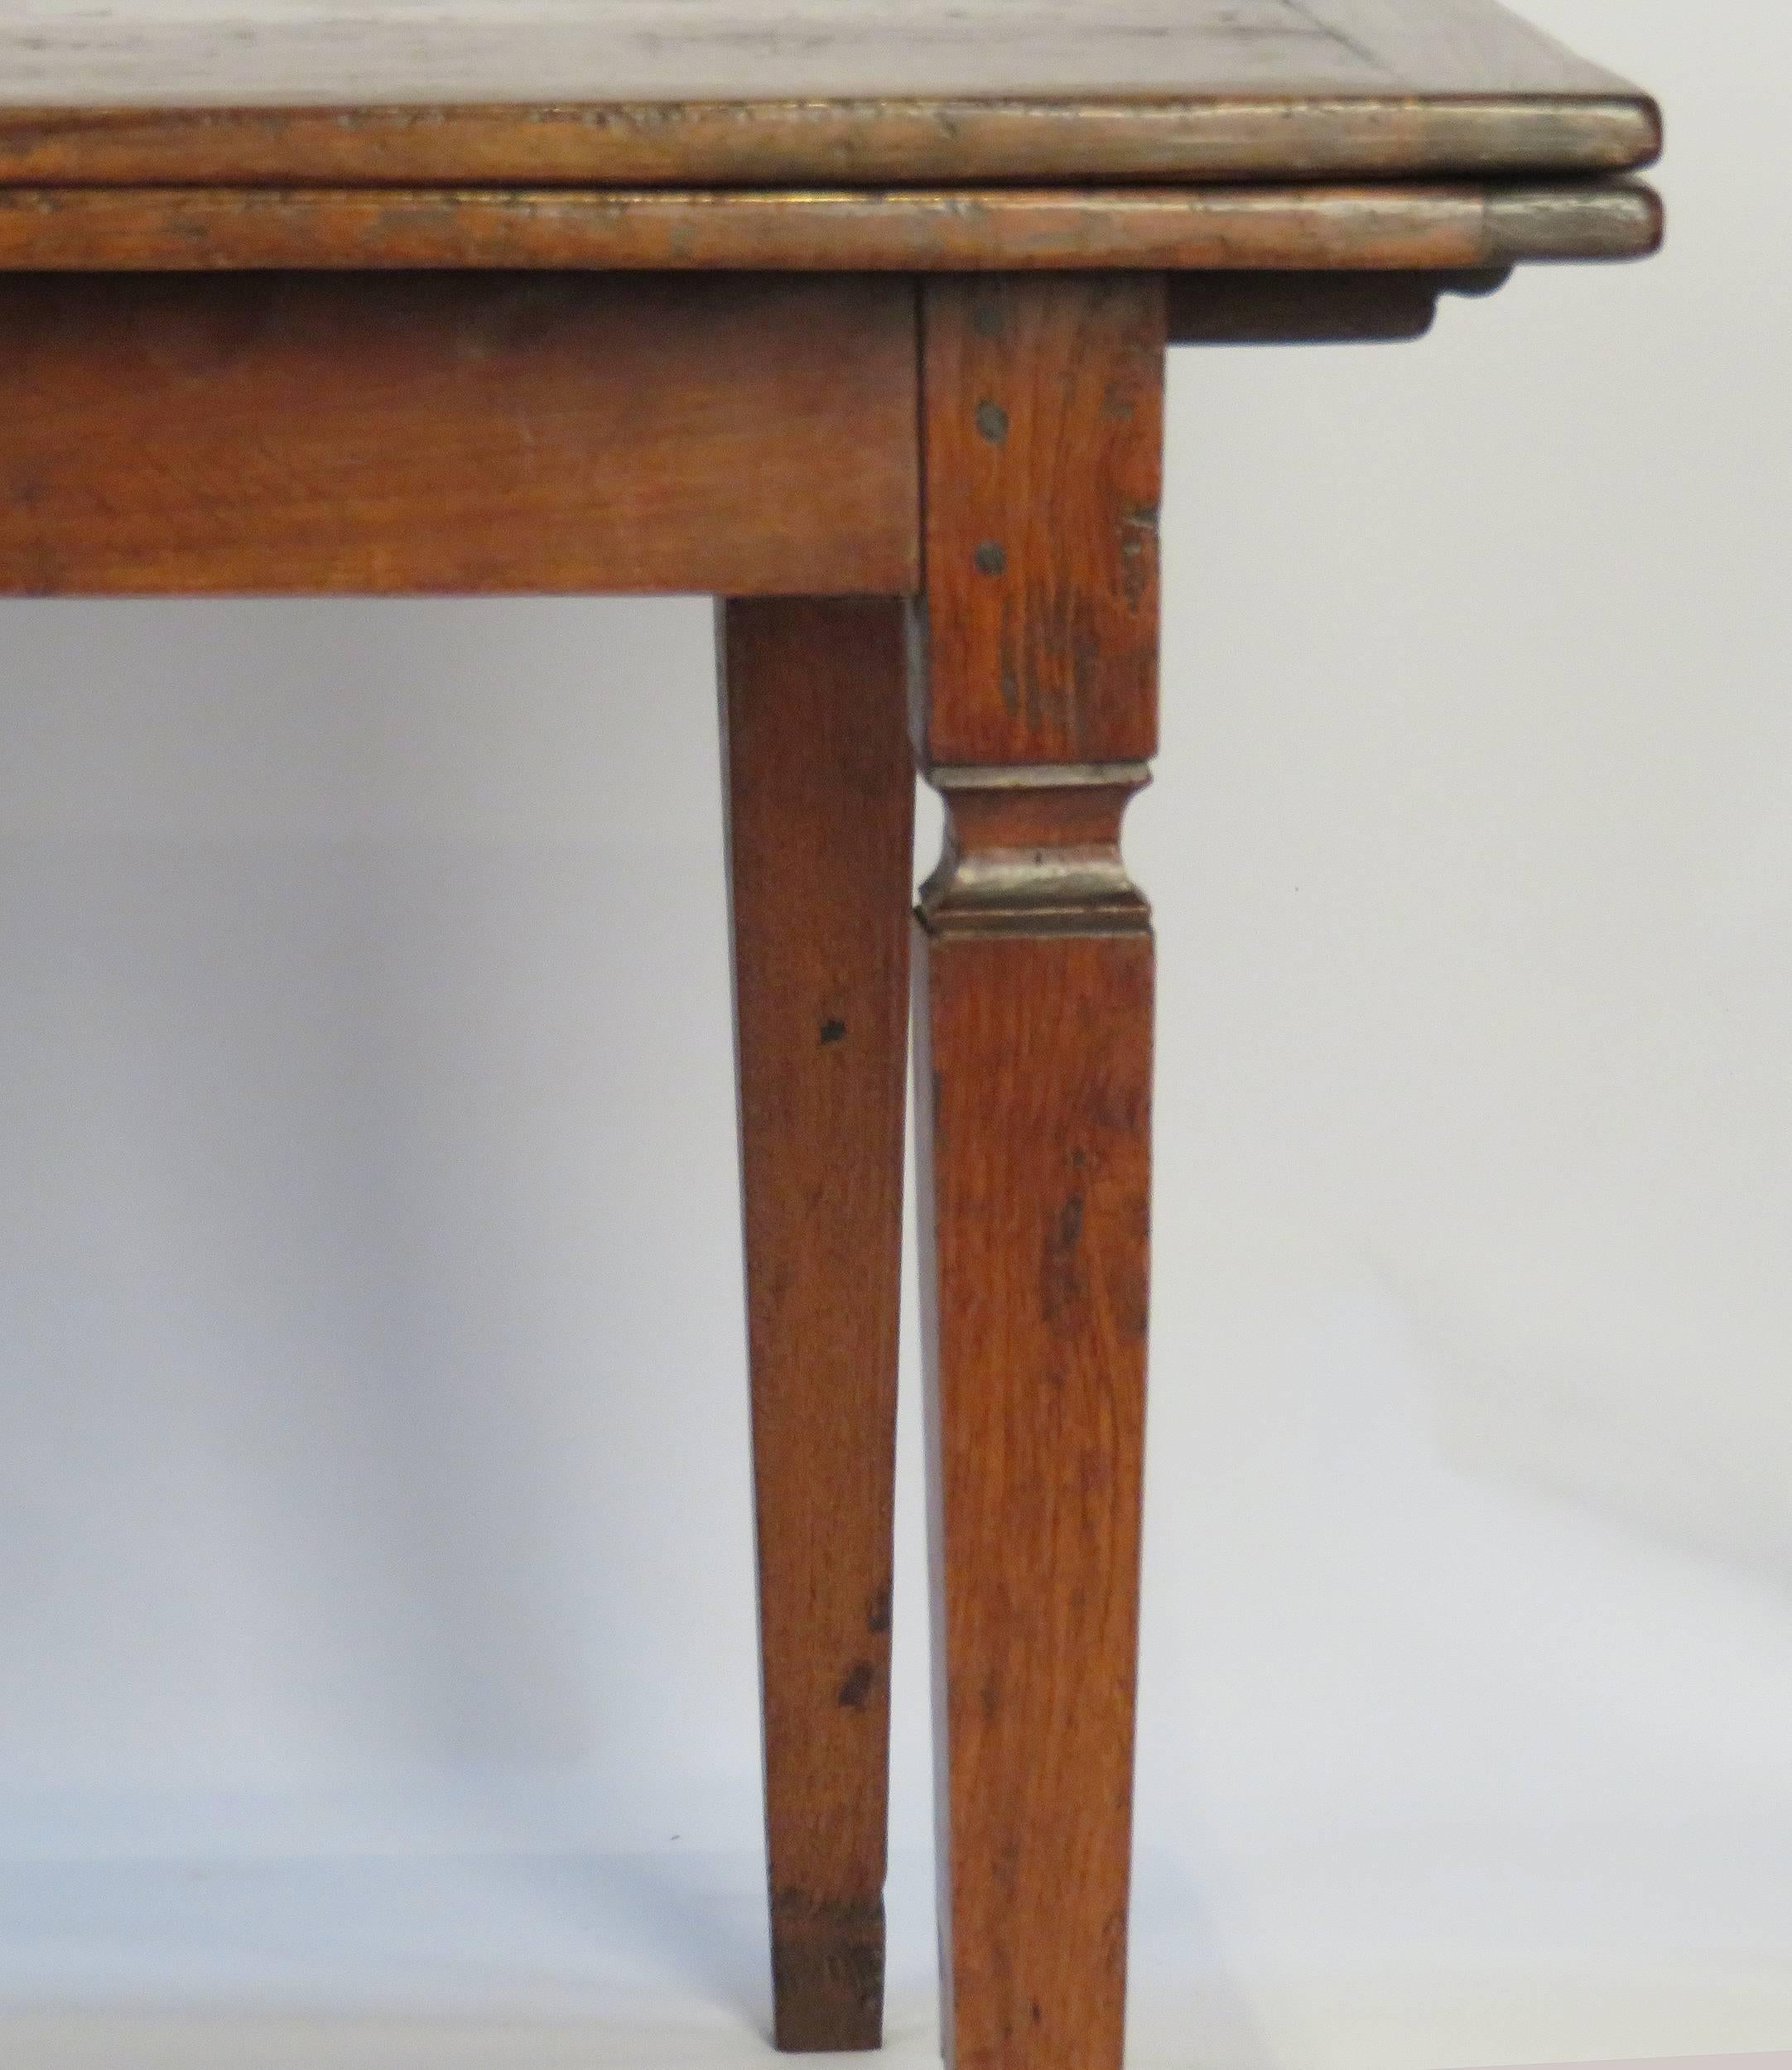 A large and useful farm house table with two draw leafs. Great proportions color and size. We date this to the first part of the 19th century. Measurements are as the table is shown. Fully opened the table extends to 137.5 inches wide.